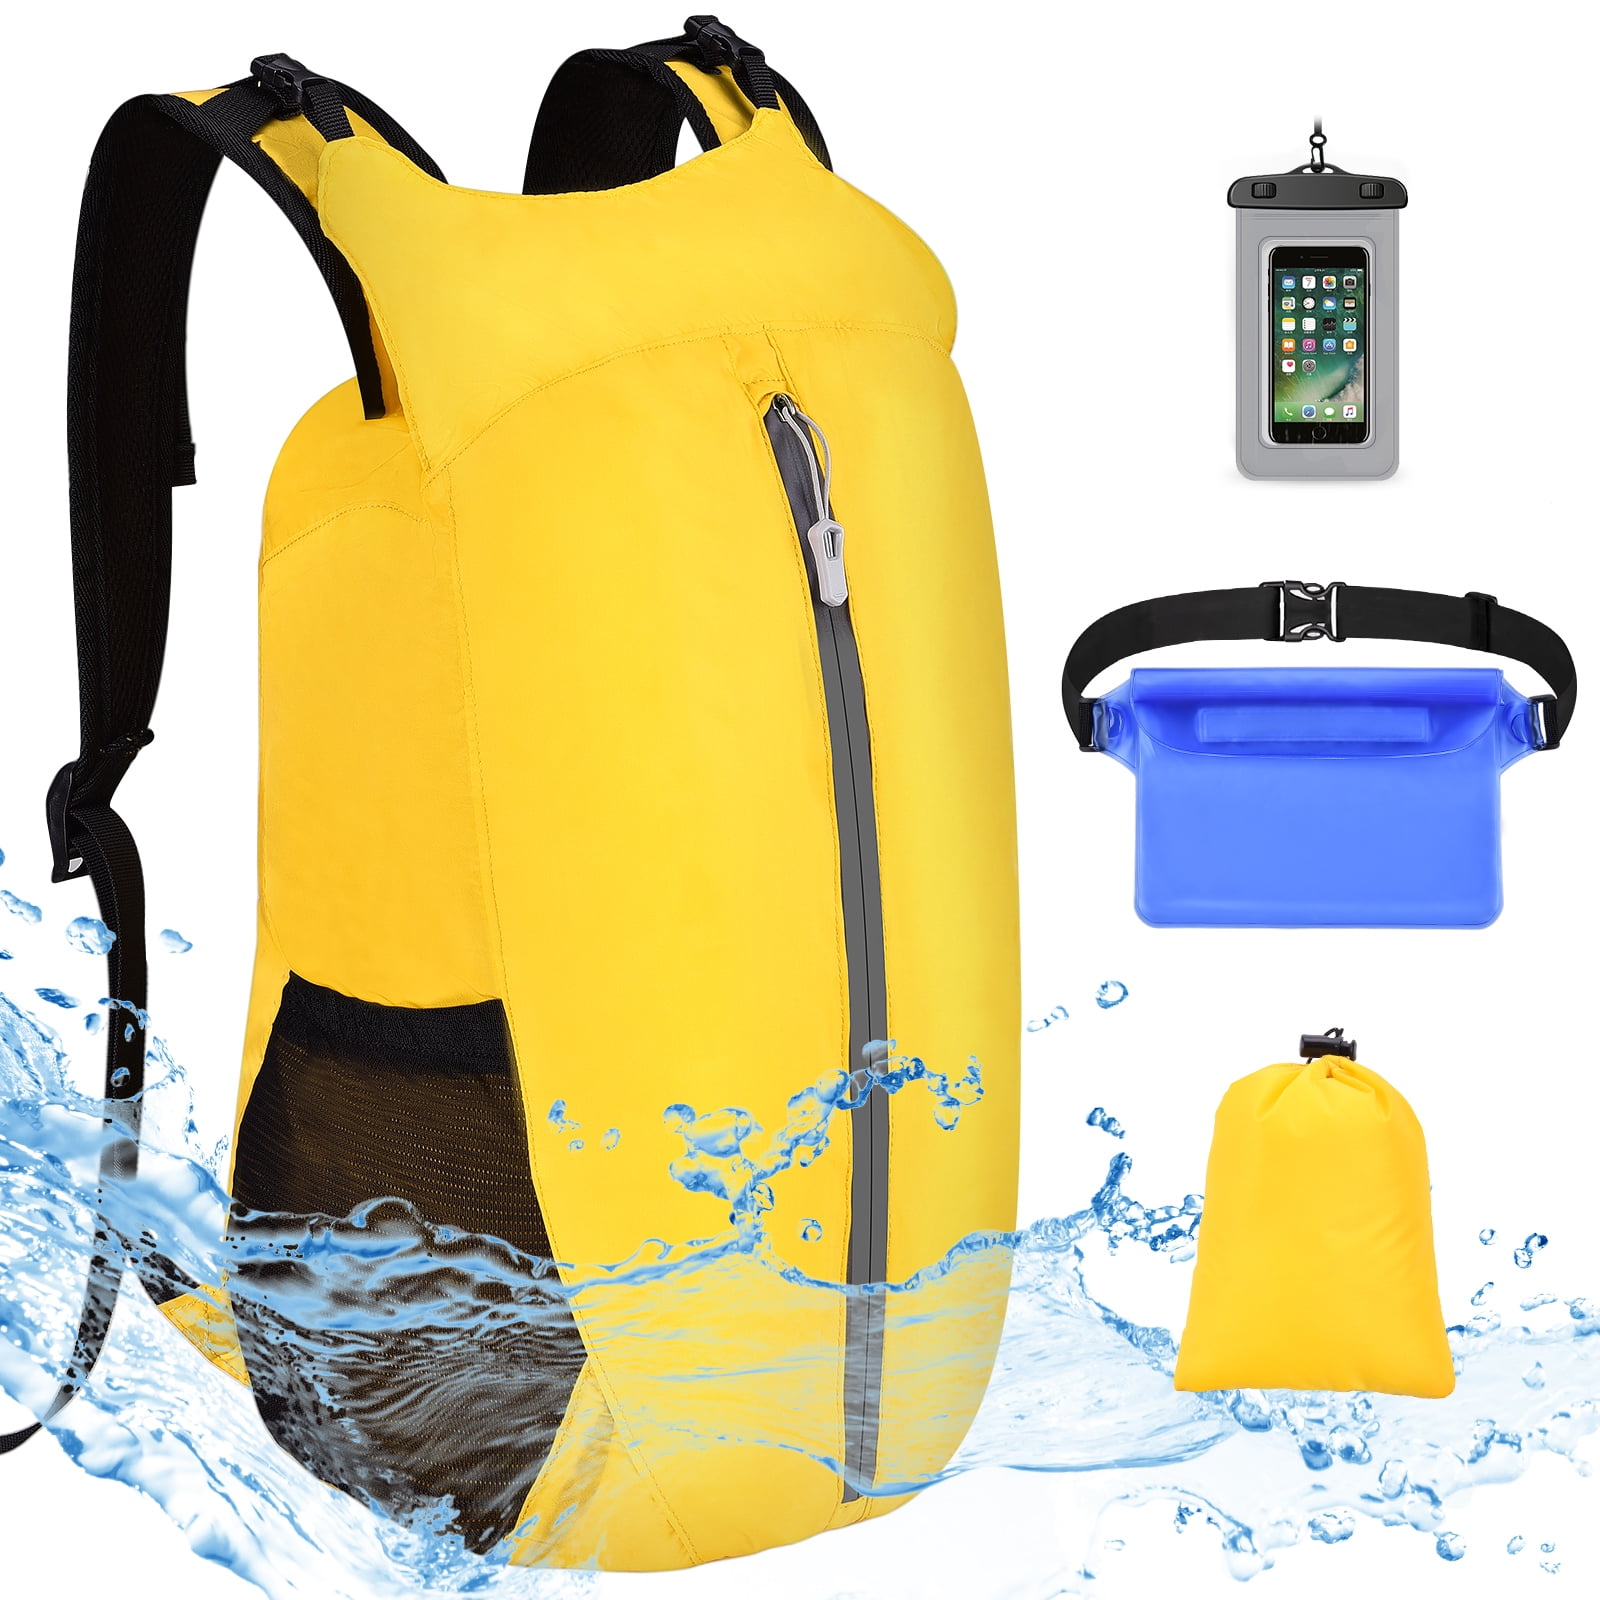 Floating Bag with Zippered Pocket and Phone Case HEETA Waterproof Backpack for Women Men 35L Dry Bag Backpack with Roll-Top Closure Black Waterproof Bag for Kayaking Boating Rafting Fishing Beach 